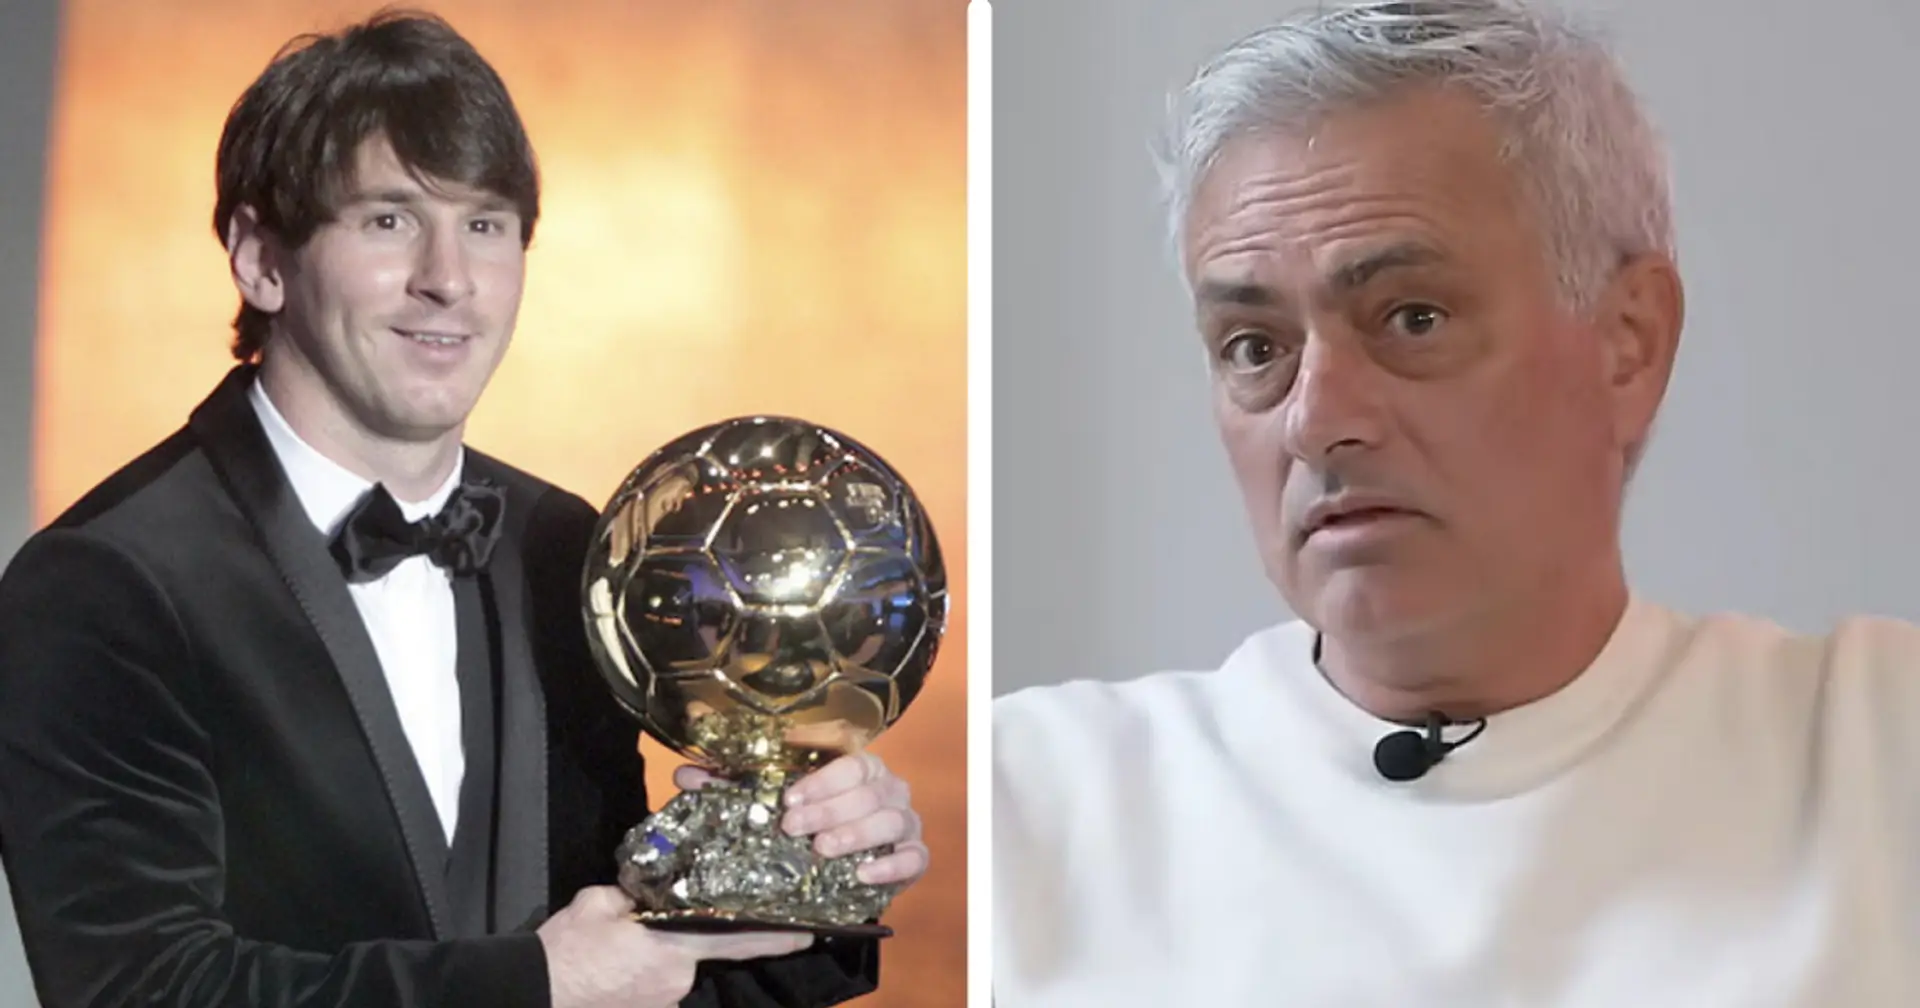 Jose Mourinho delivers brilliant response when asked if Leo Messi 'robbed' his former player of Ballon d'Or